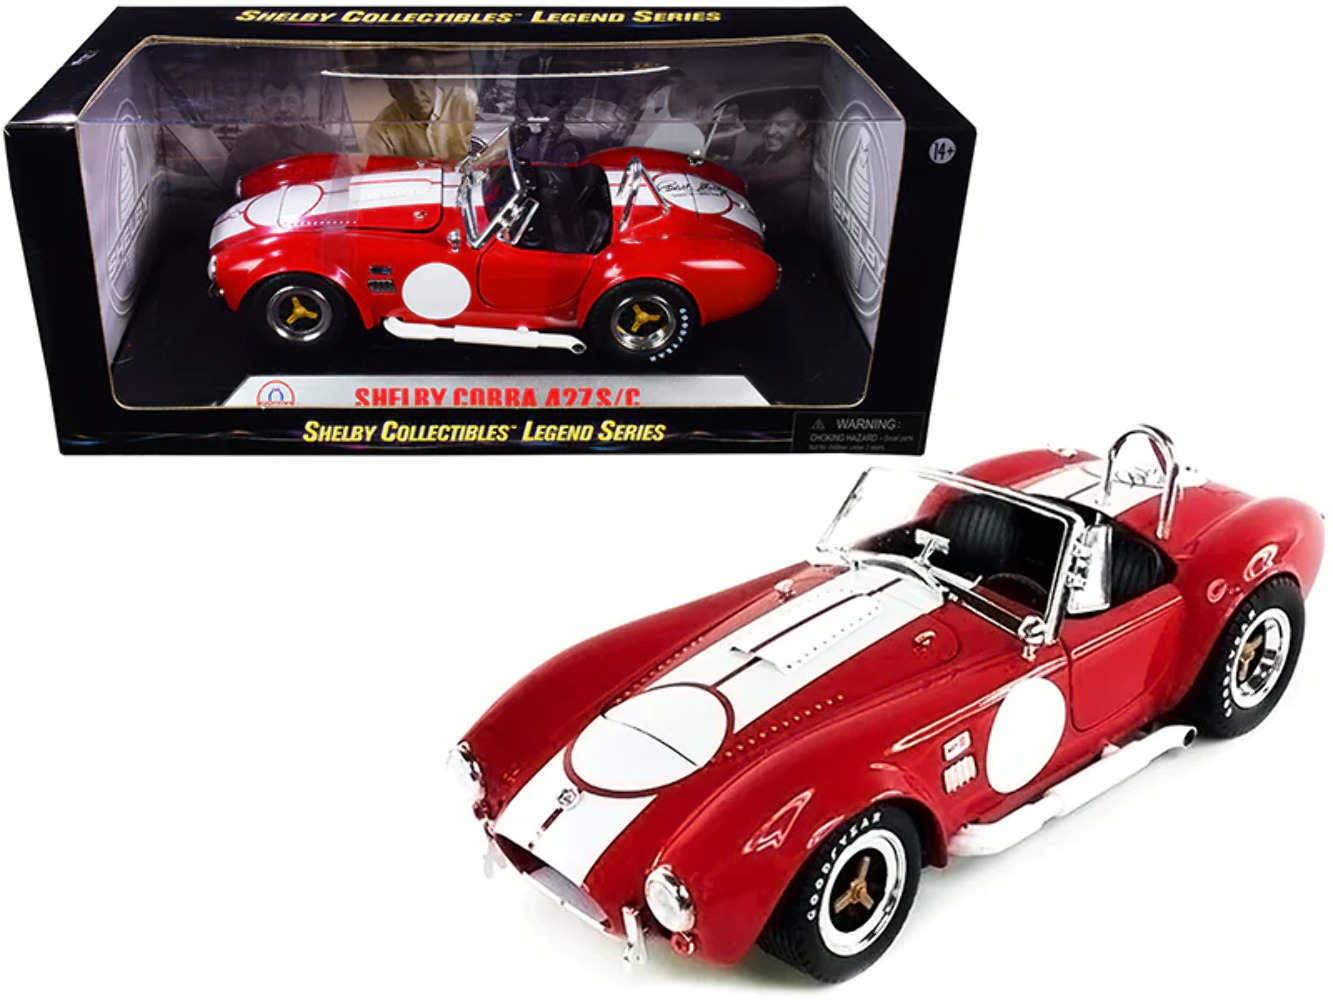 1965 Shelby Cobra 427 S/C Red with White Stripes with Printed Carroll Shelby's S